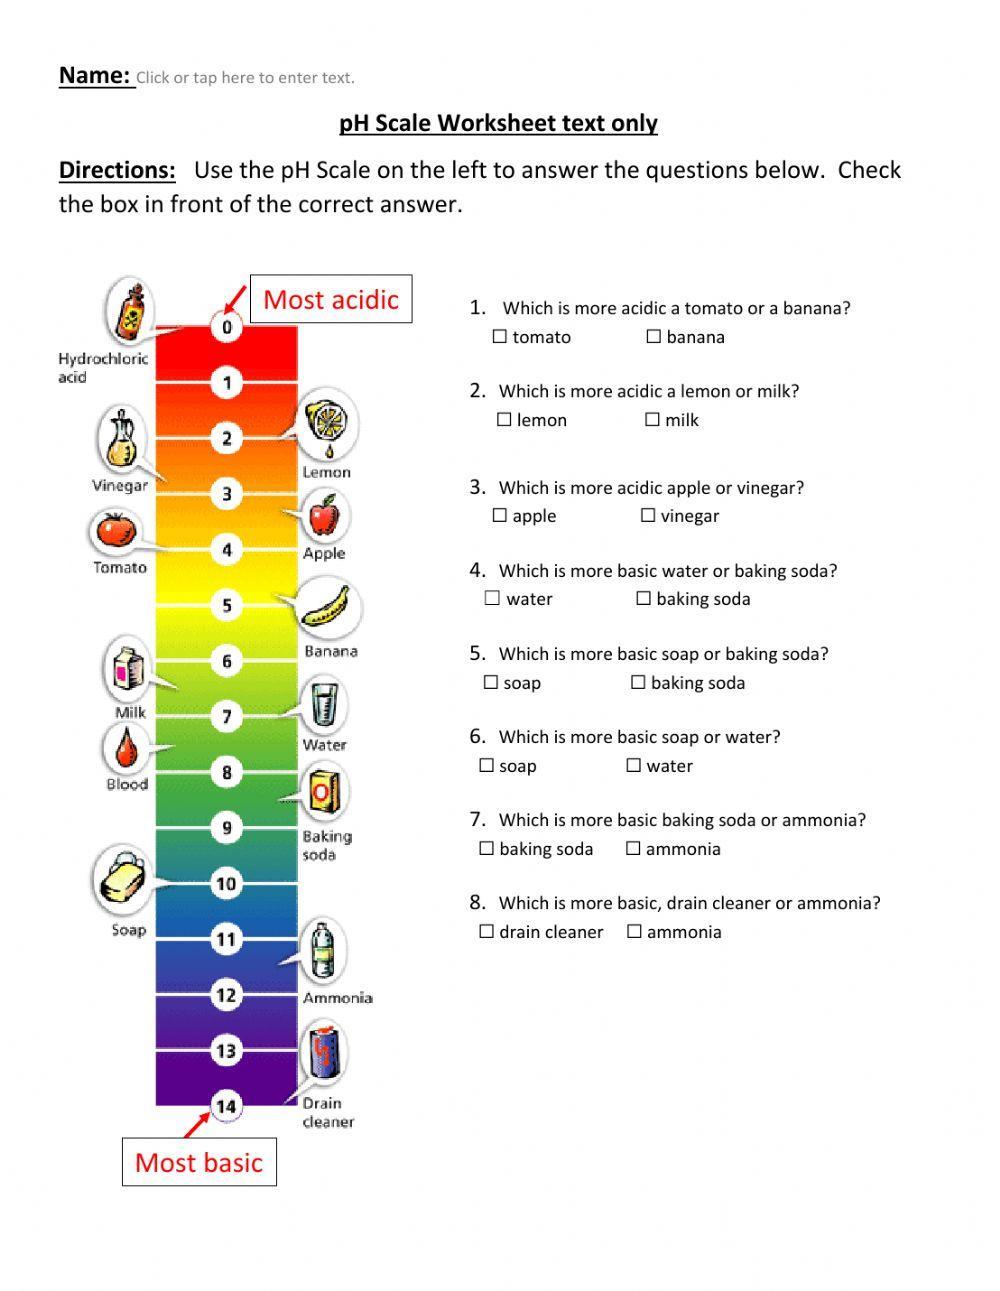 PH Scale Worksheet text only